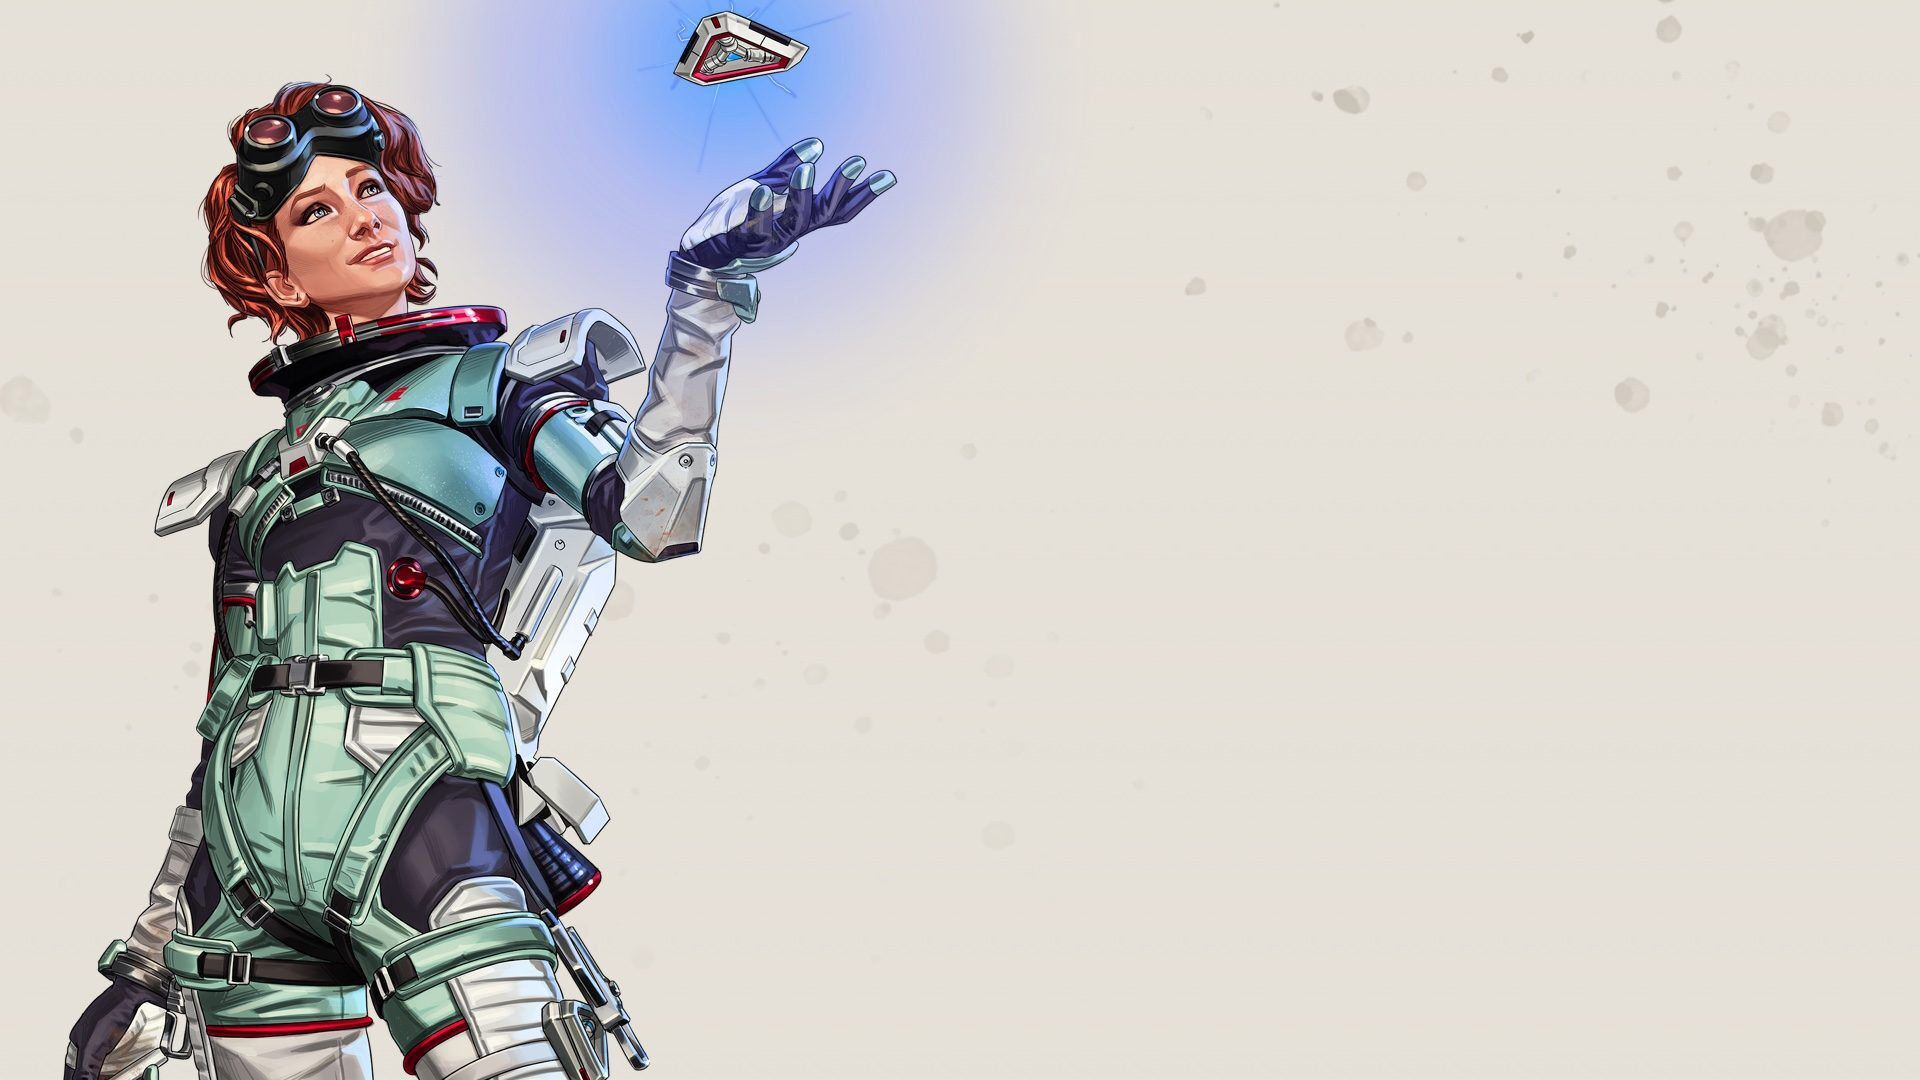 Check out new Apex Legends character Horizon's abilities